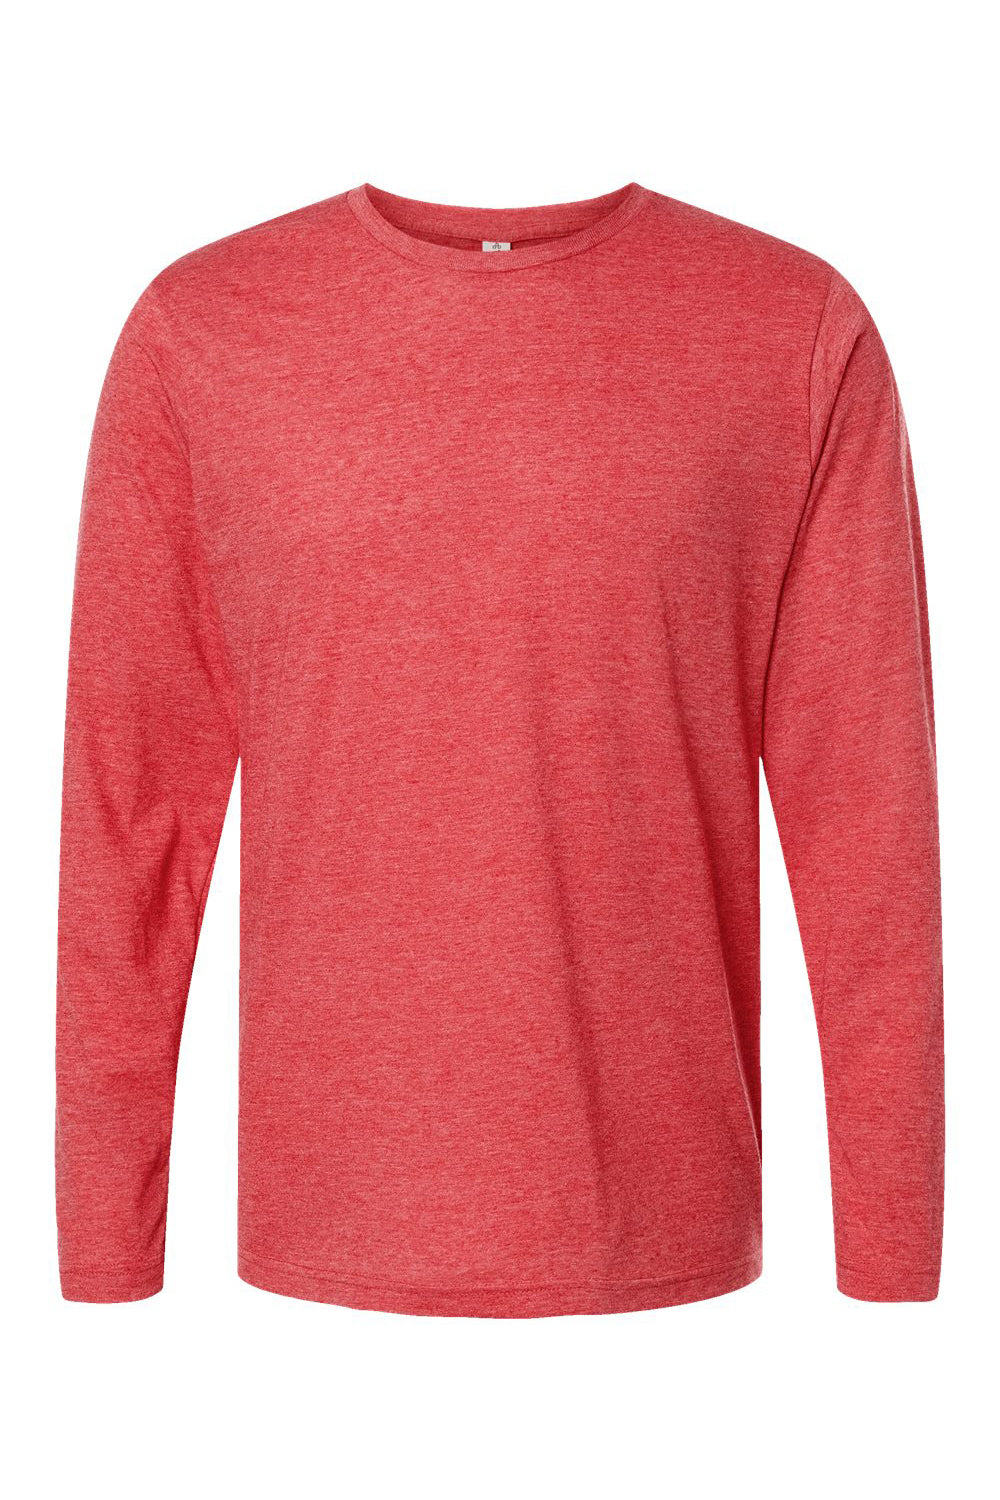 Tultex 242 Mens Poly-Rich Long Sleeve Crewneck T-Shirt Heather Red Flat Front